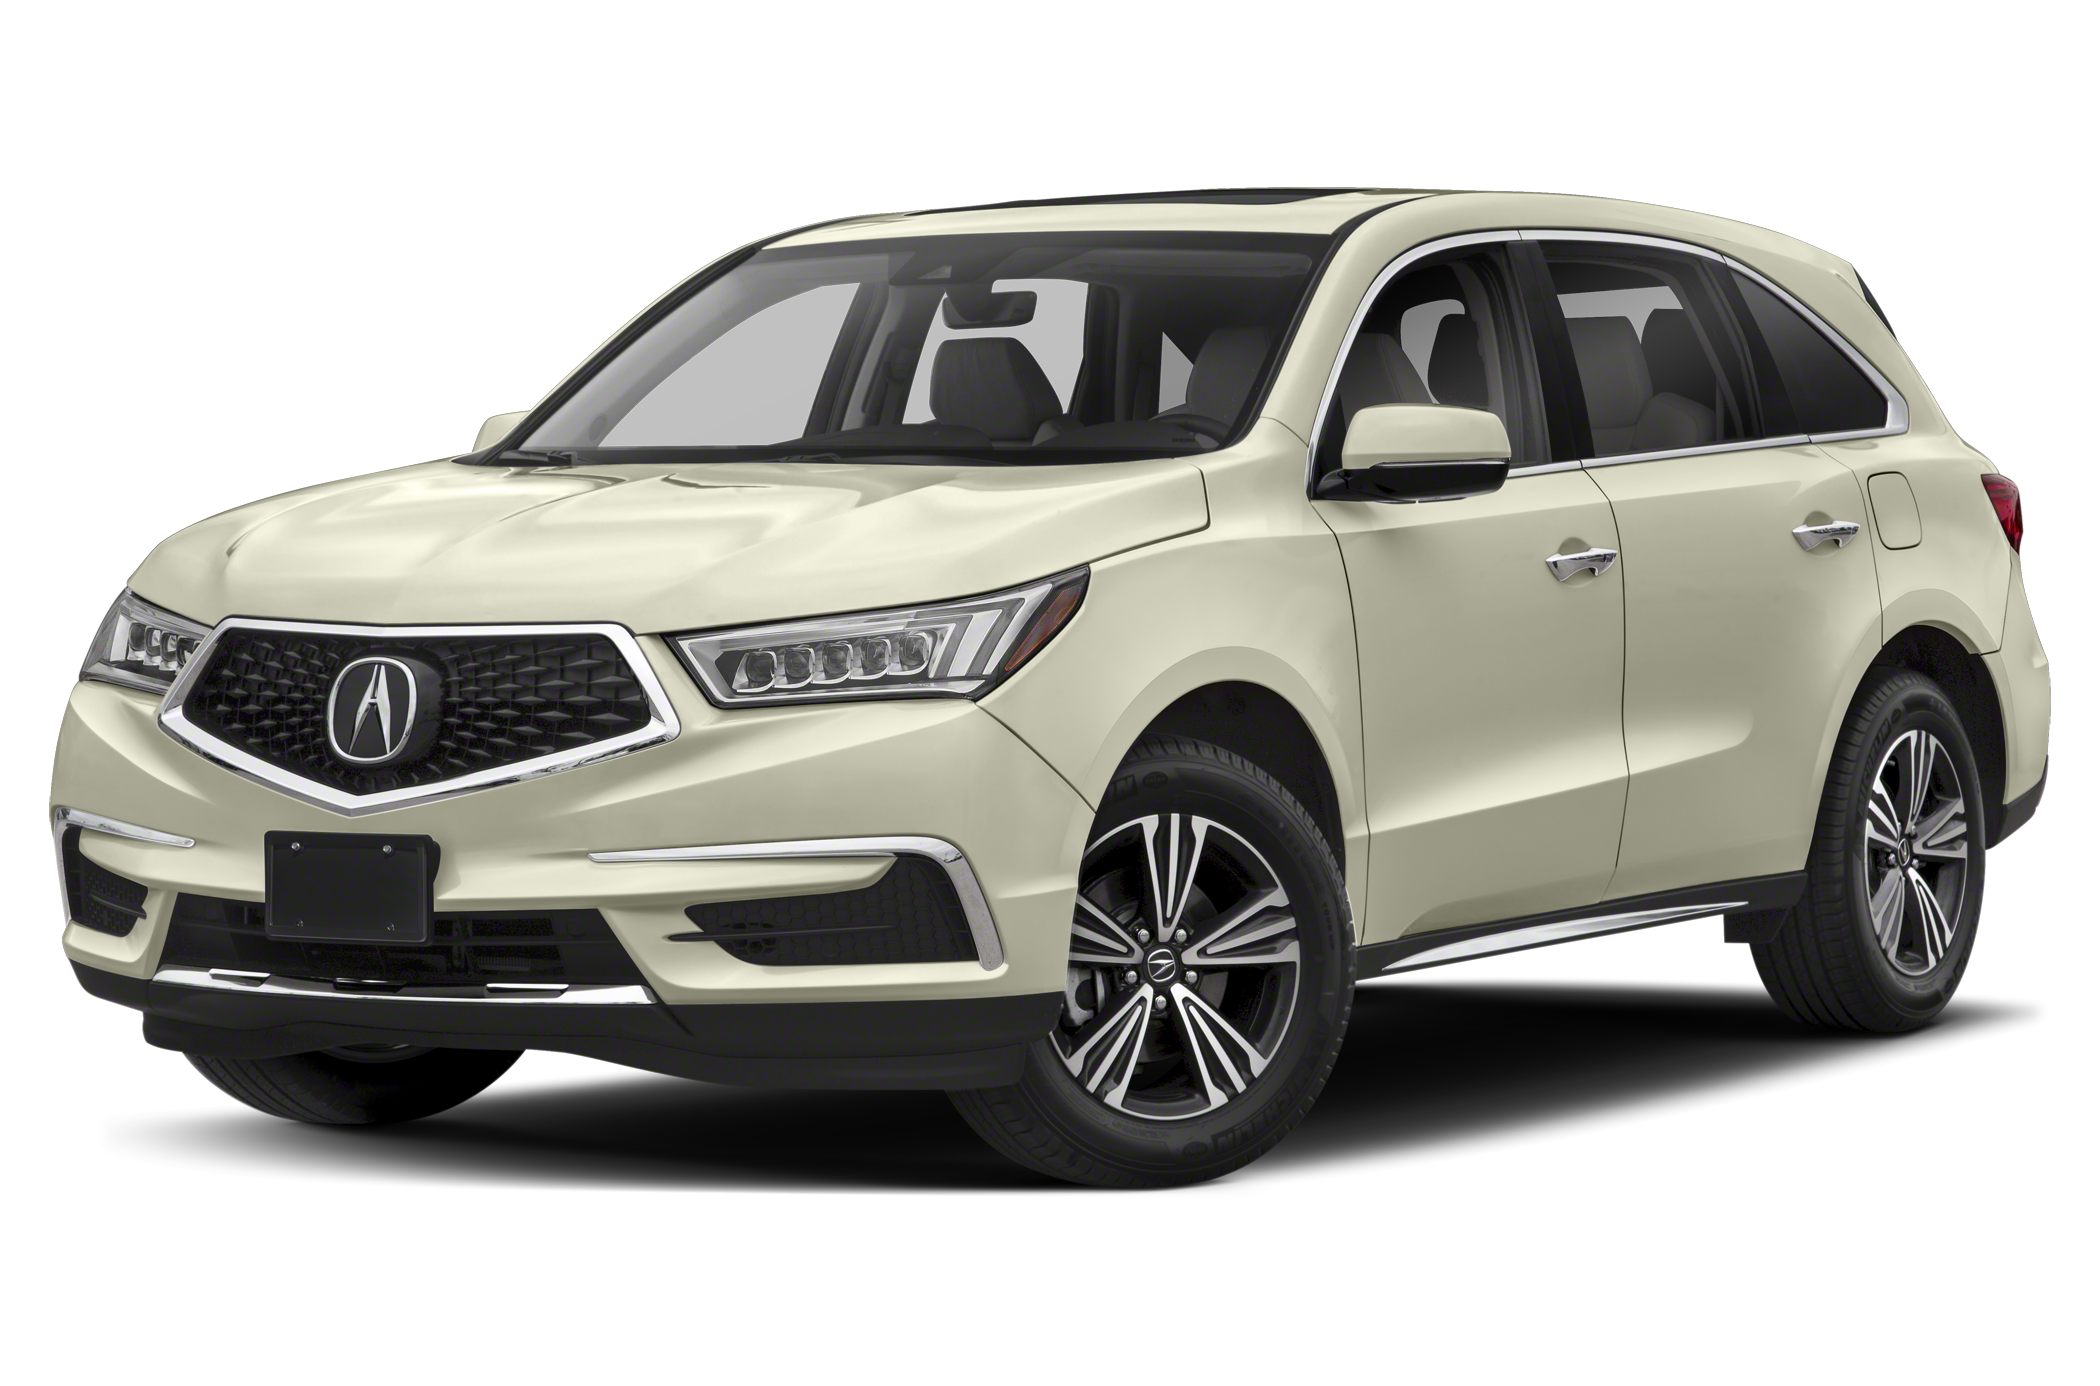 2018 acura mdx 3 5l 4dr sh awd specs and prices autoblog